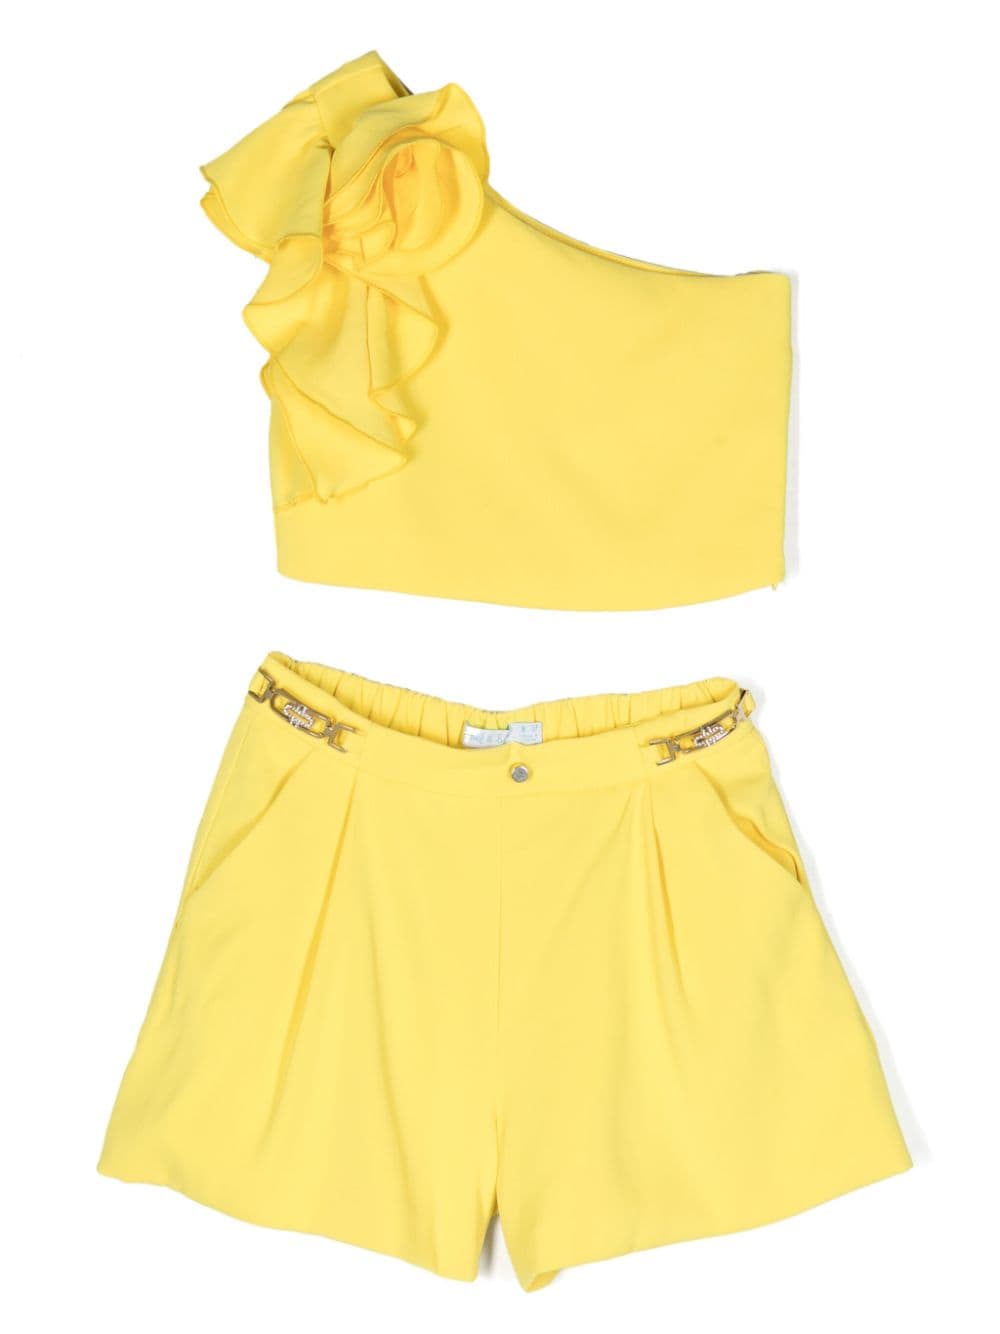 Yellow outfit for girls